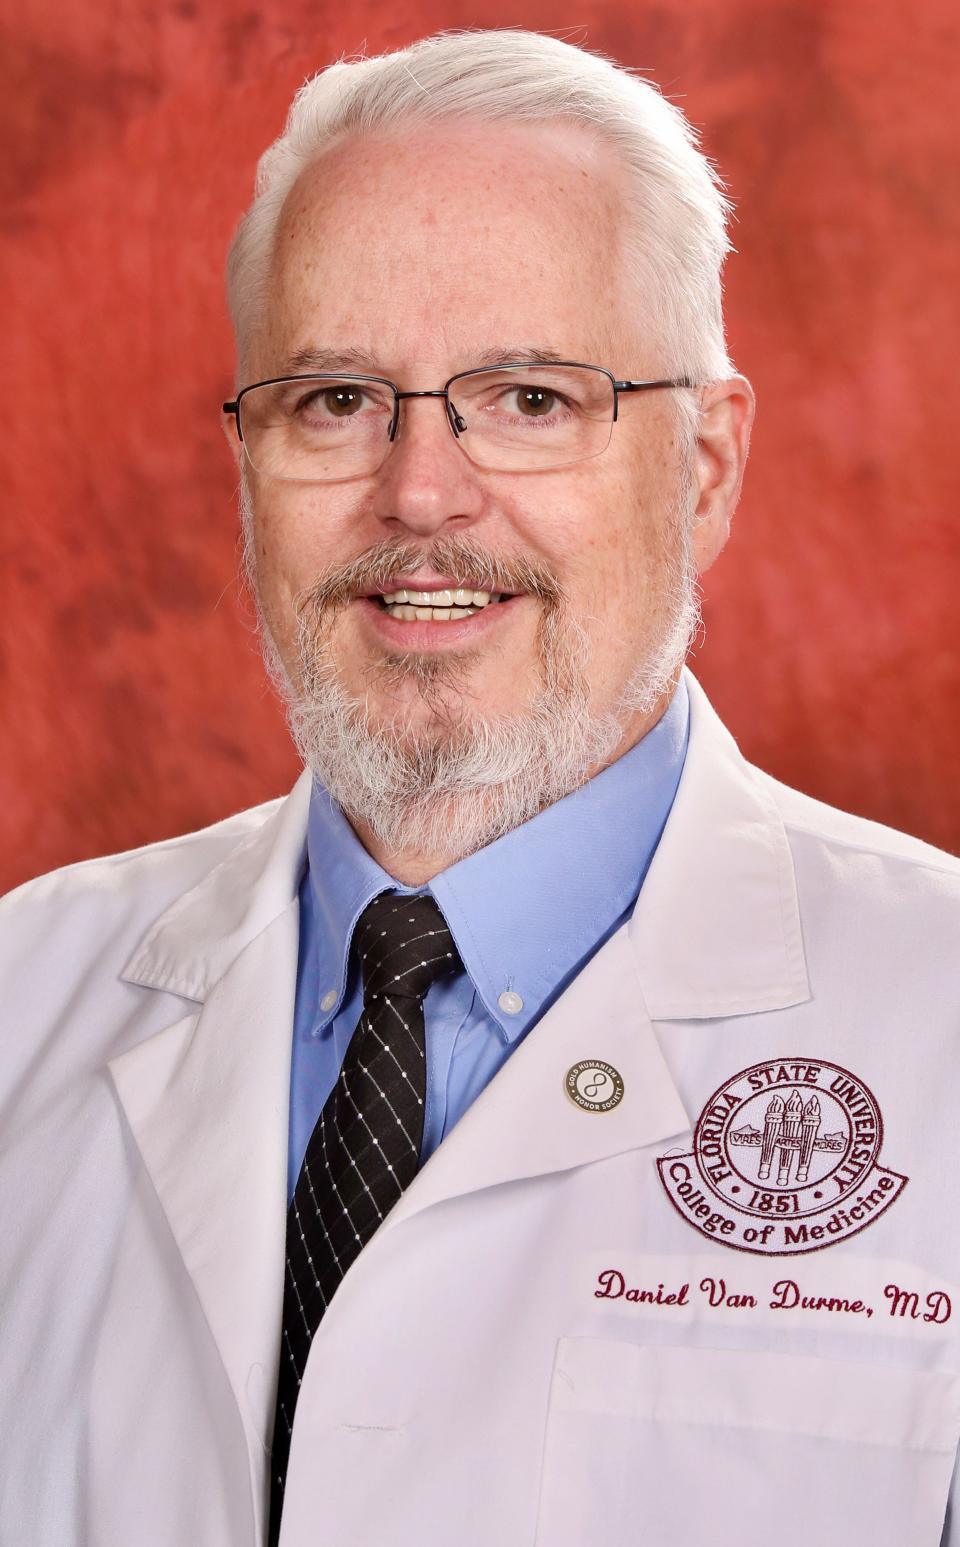 Daniel Van Durme is the chief medical officer at Florida State University's College of Medicine.